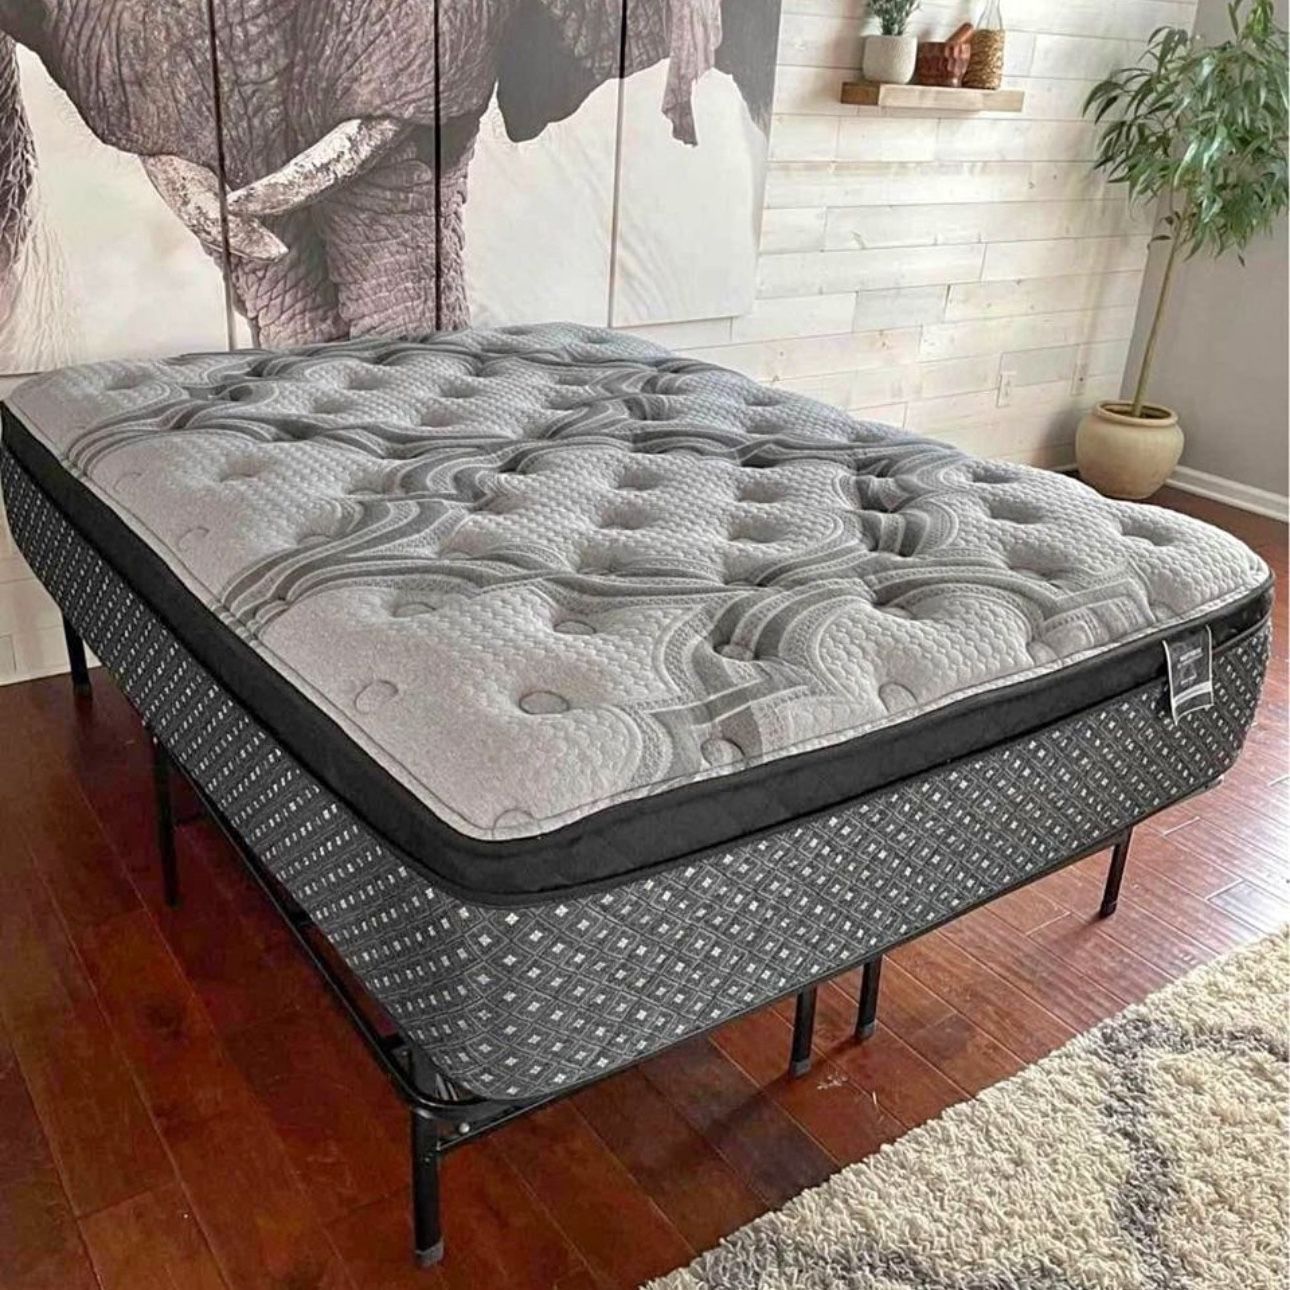 King/Queen/Full/Twin mattresses available TODAY